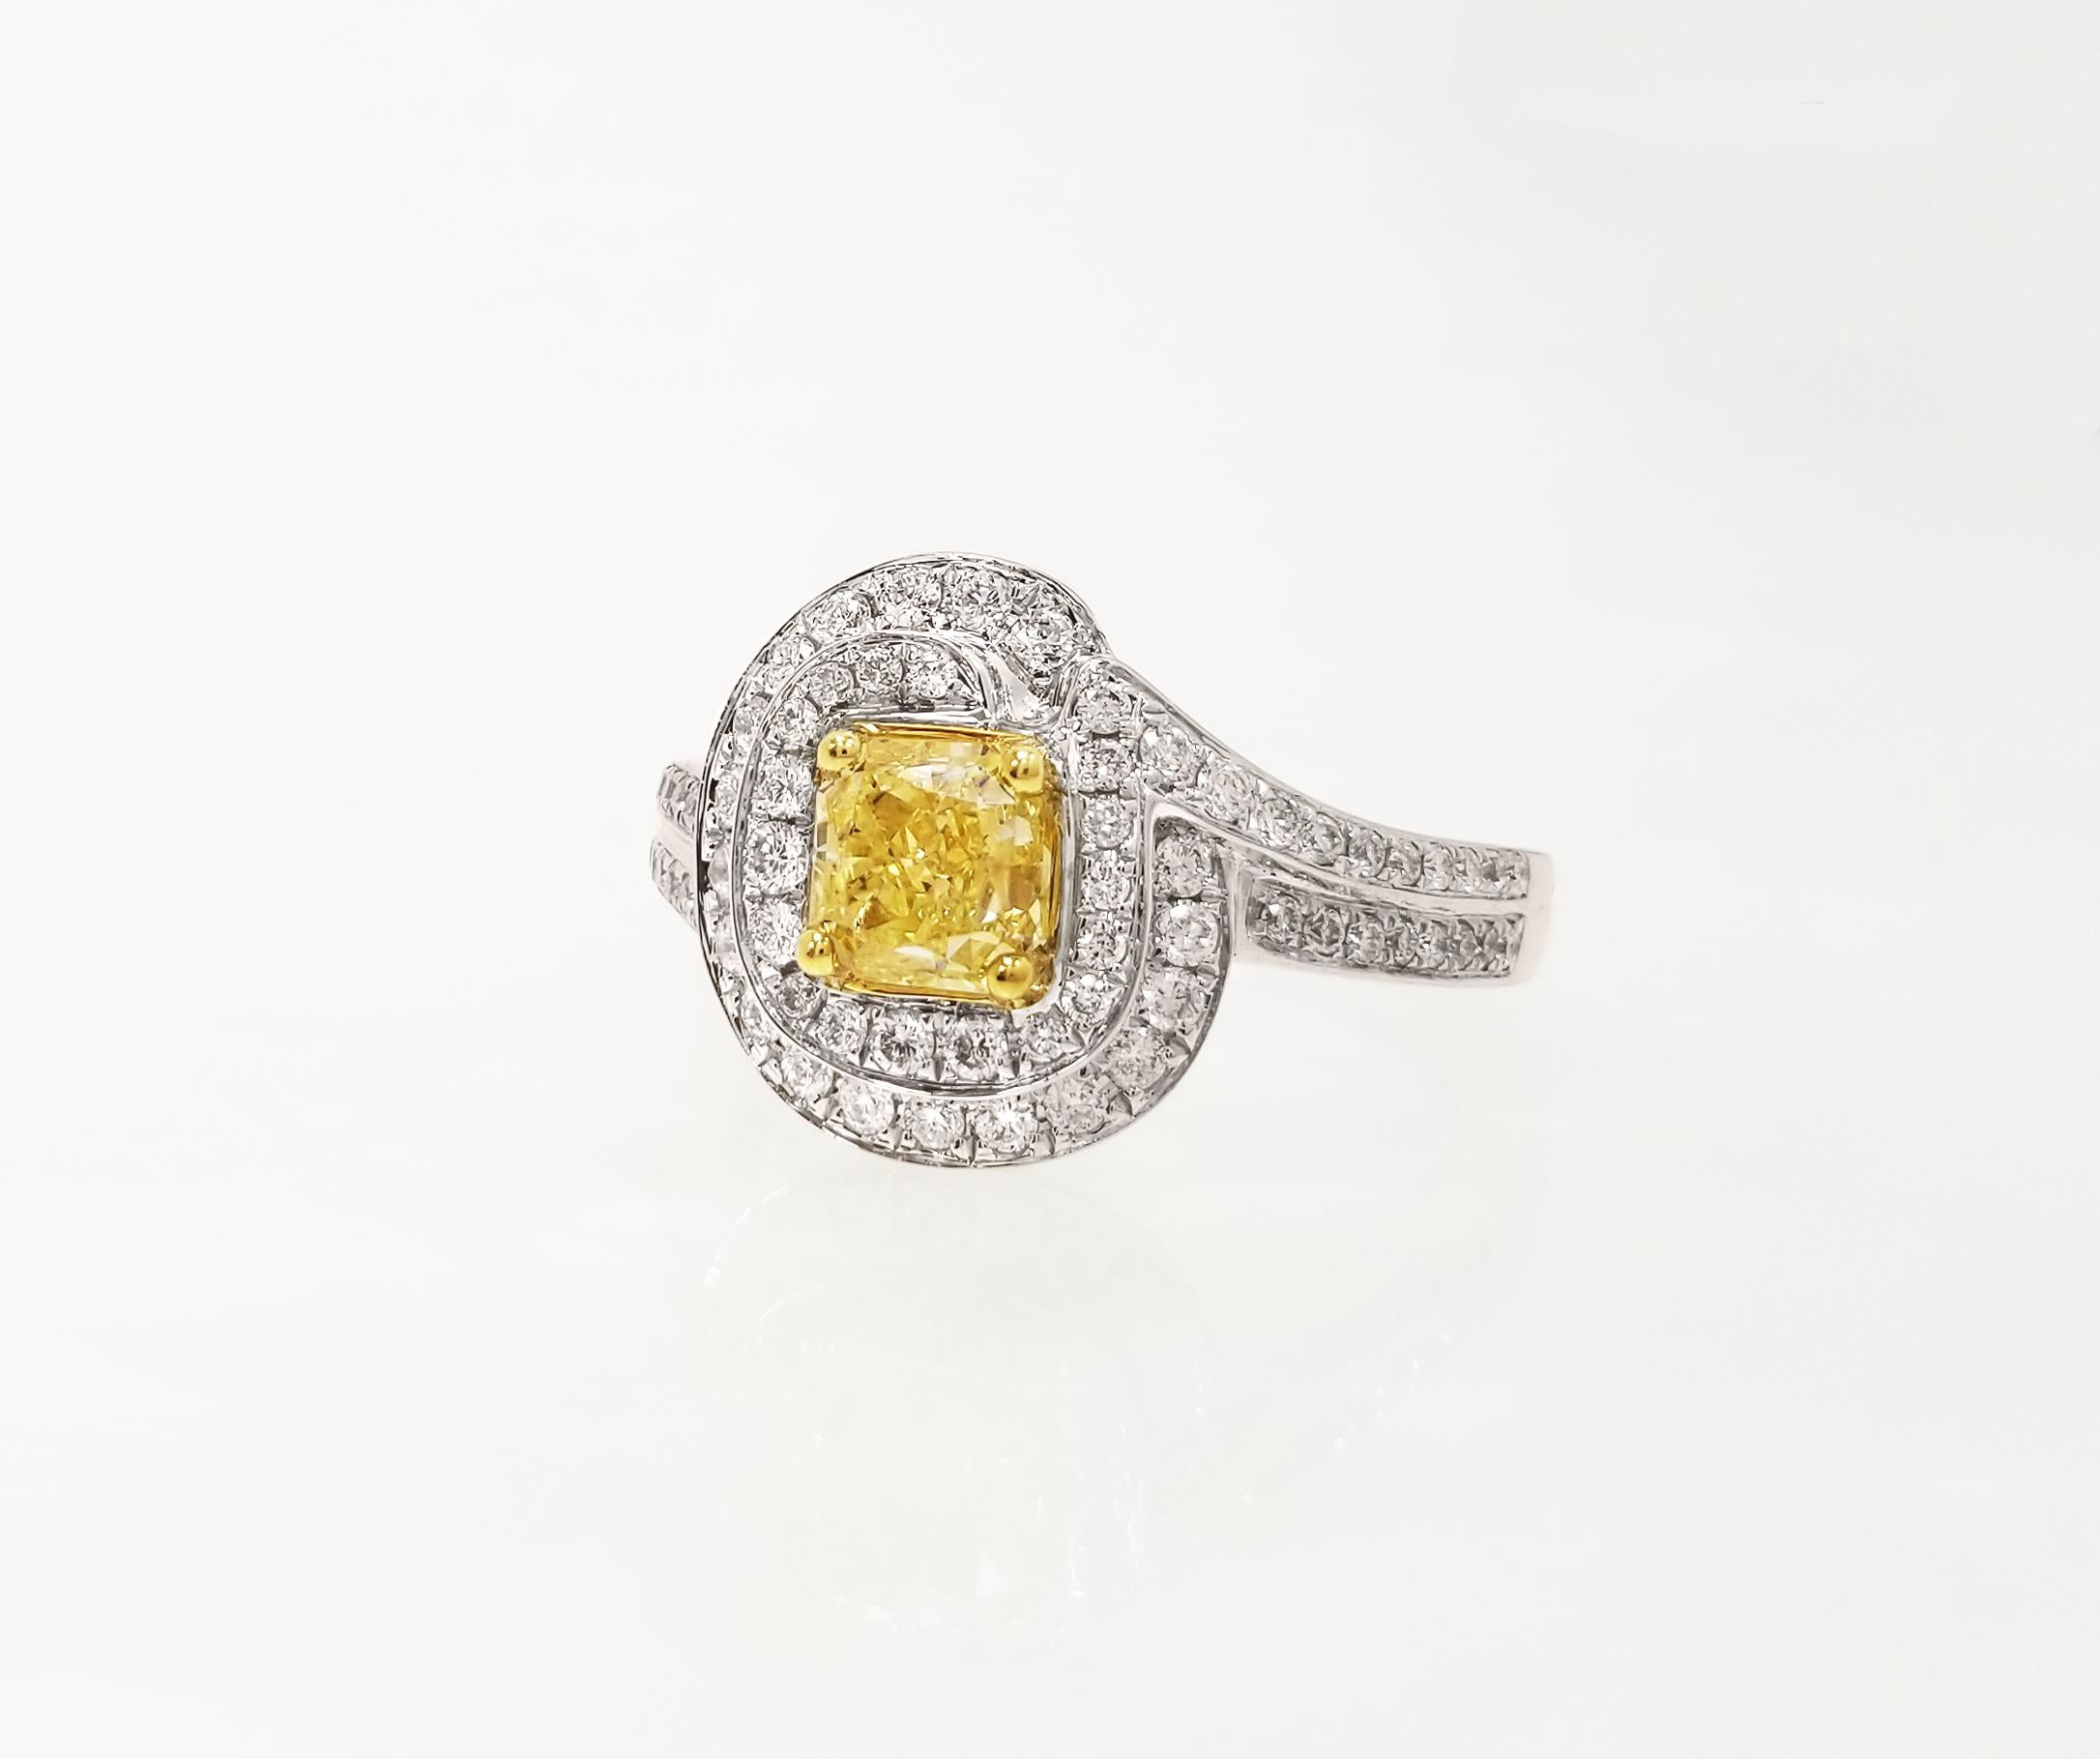 GIA-Certified Natural Fancy Yellow 1.05 Carat Radiant-cut VVS2 Diamond Engagement Ring on 18k White Gold Band. Featuring 2 rows of round-brilliant white diamonds in a spiral halo design – perfect as a statement or engagement ring. Ring is resizable